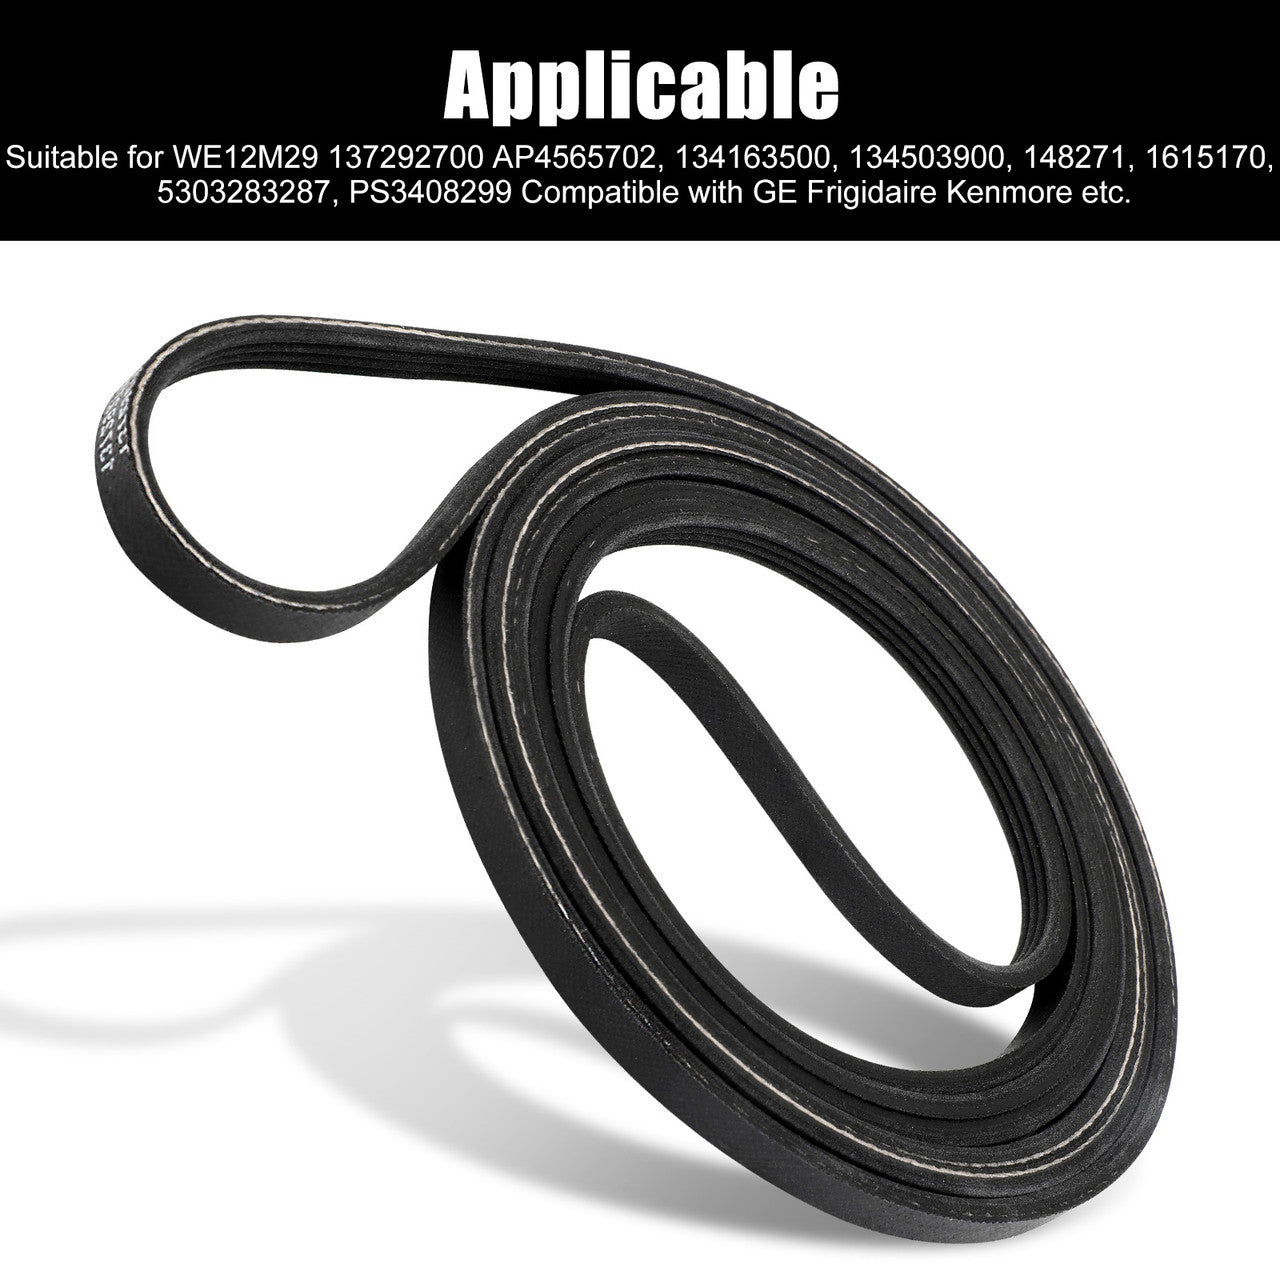 WE12M29 Dryer Drum Drive Belt Replace - for WE12M22, 137292700, WE120122, WE12M0022, AP4565702, PS3408299, 134163500 Compatible with GE/Hotpoint